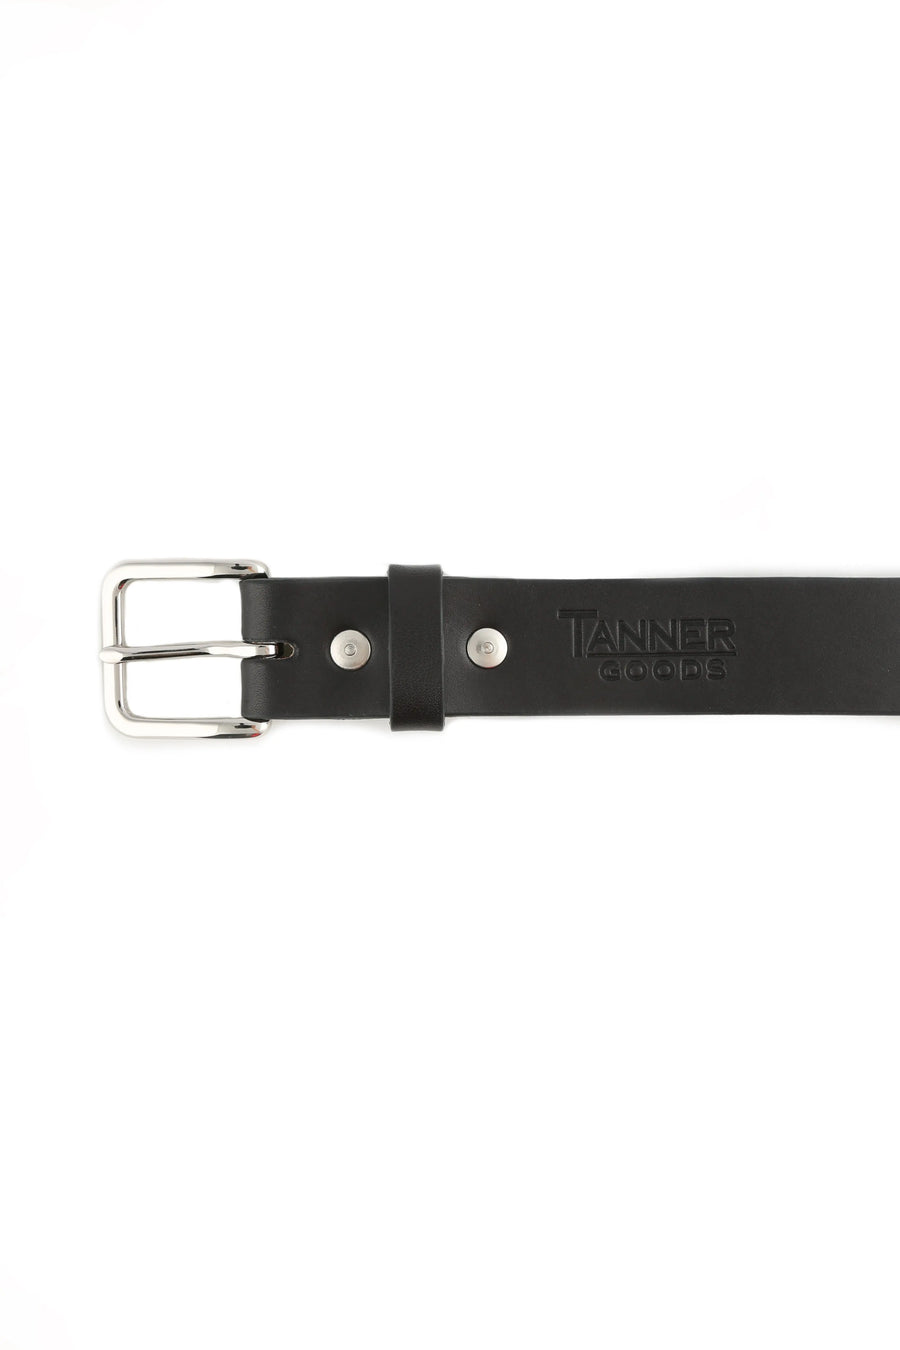 Daily Belt- Black with Stainless Hardware - Eames NW